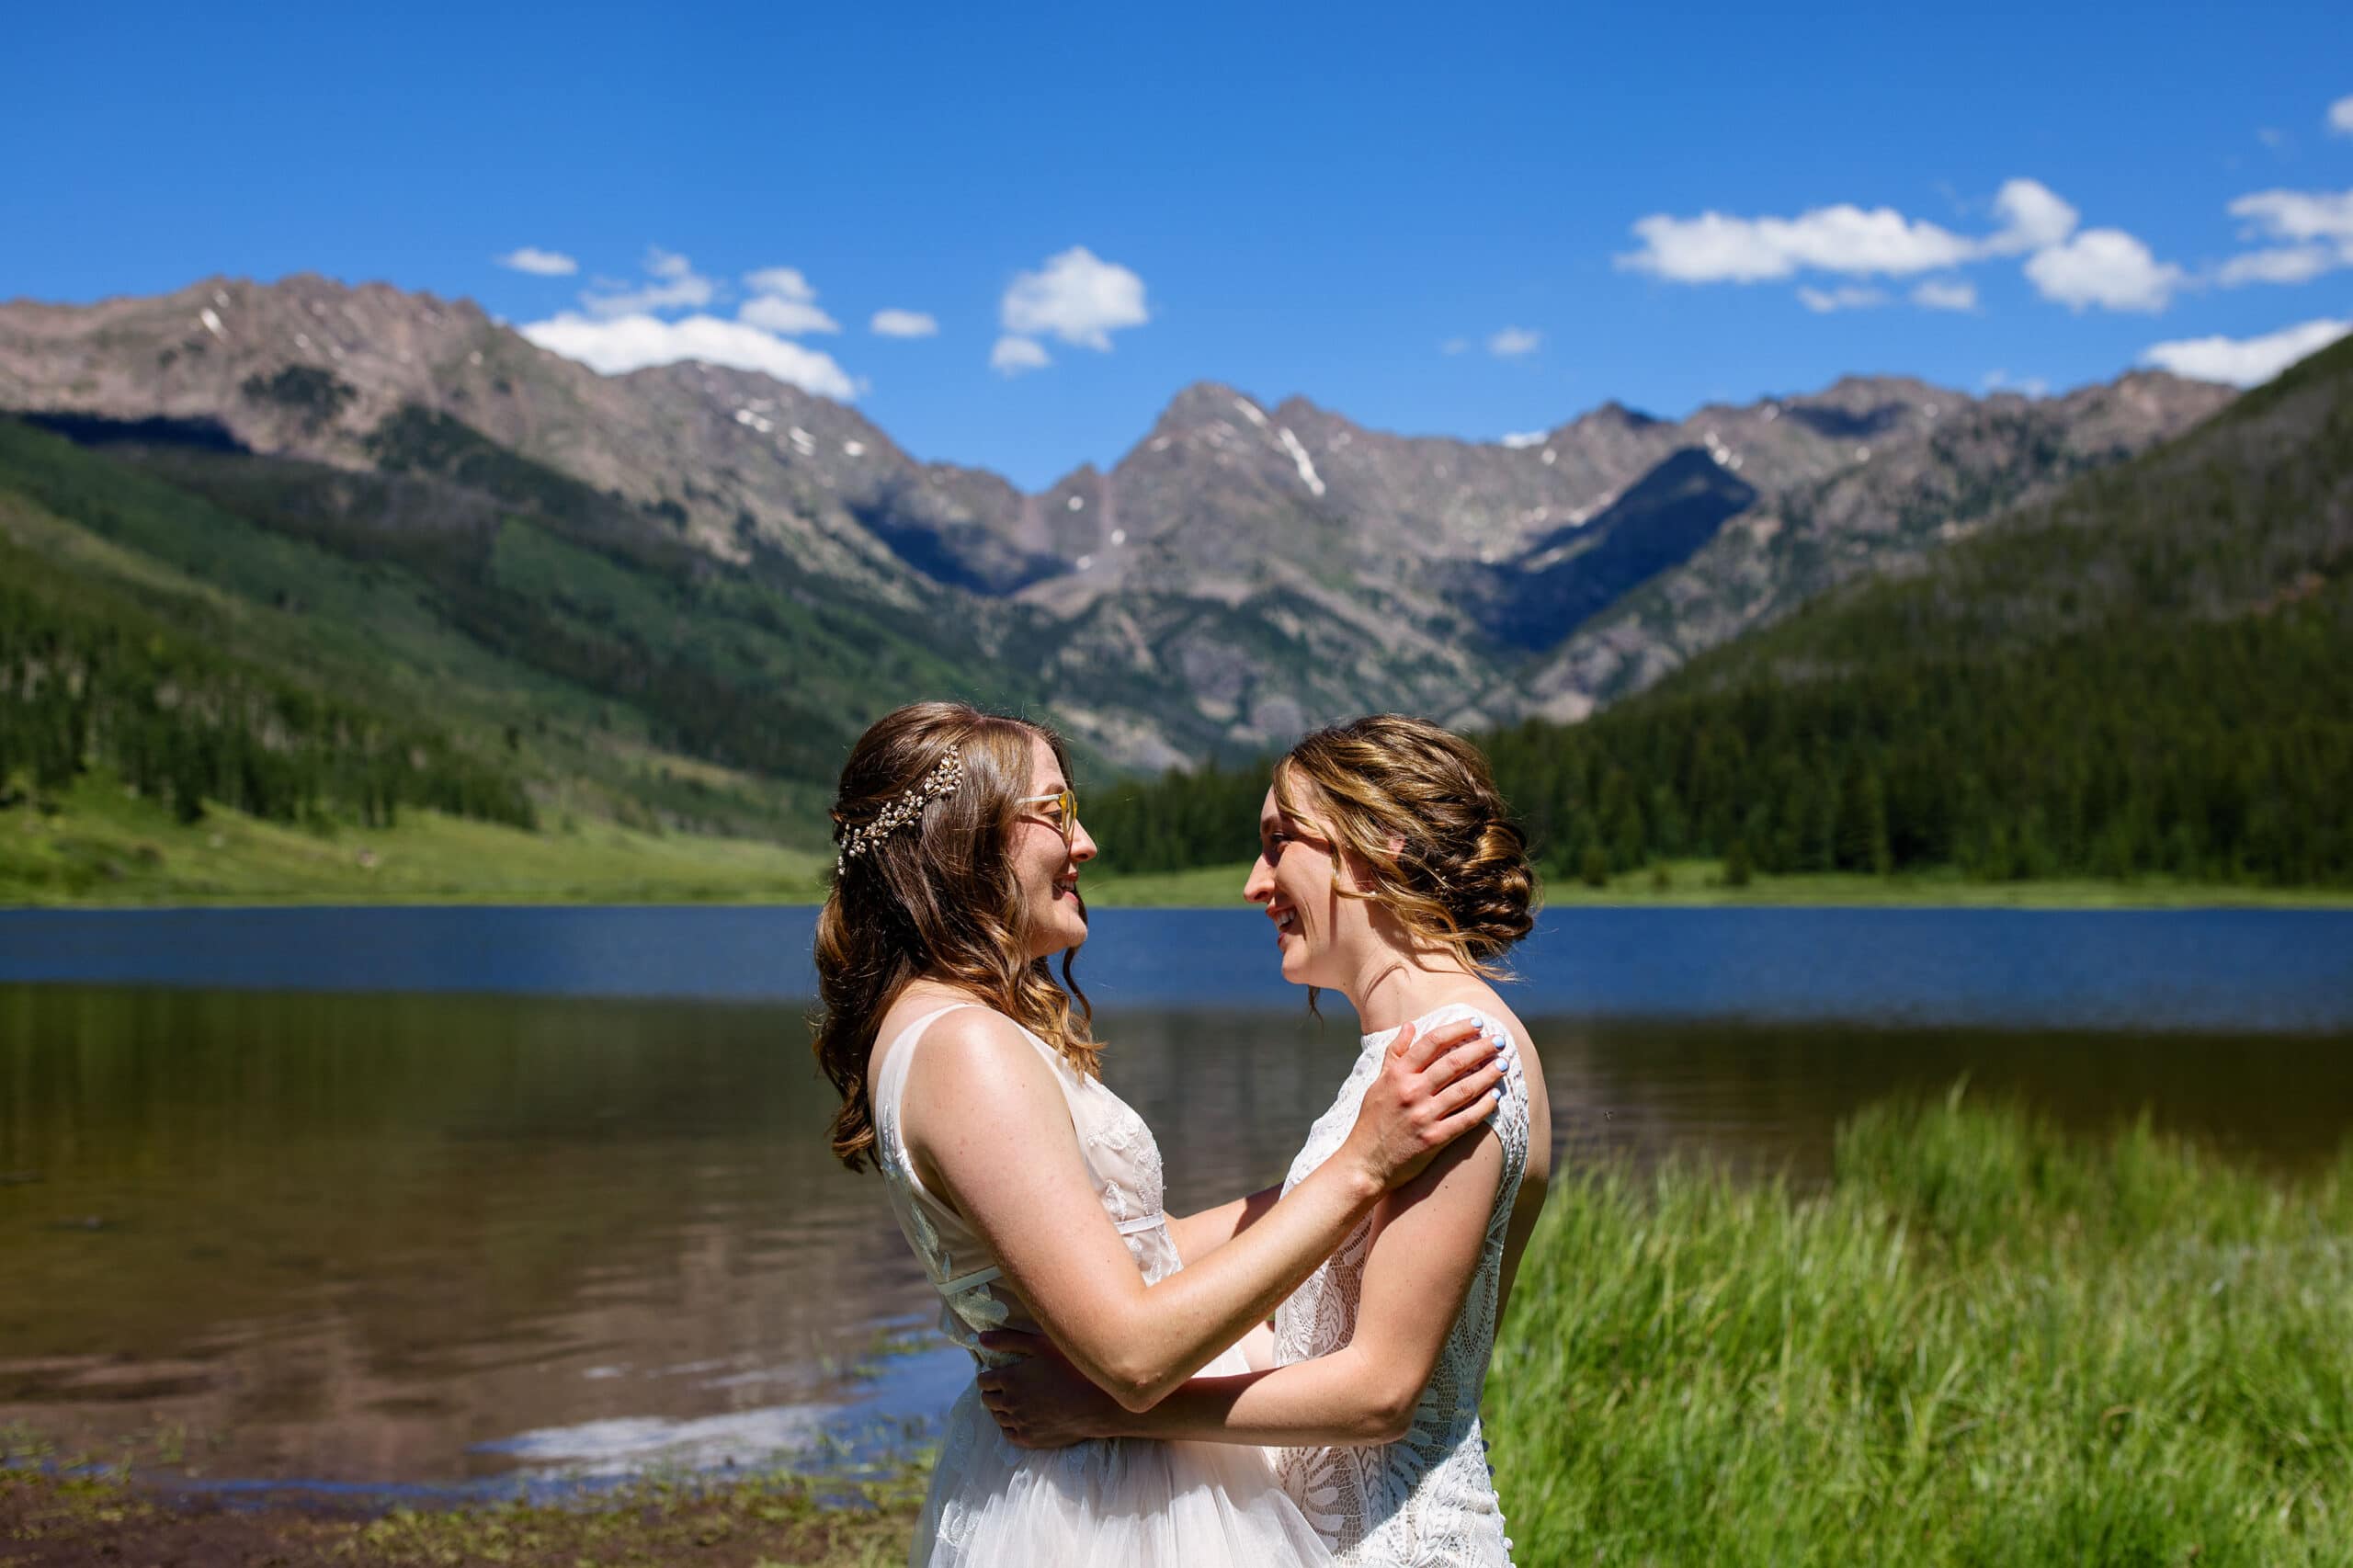 The brides share a moment together during their first look at Piney Lake